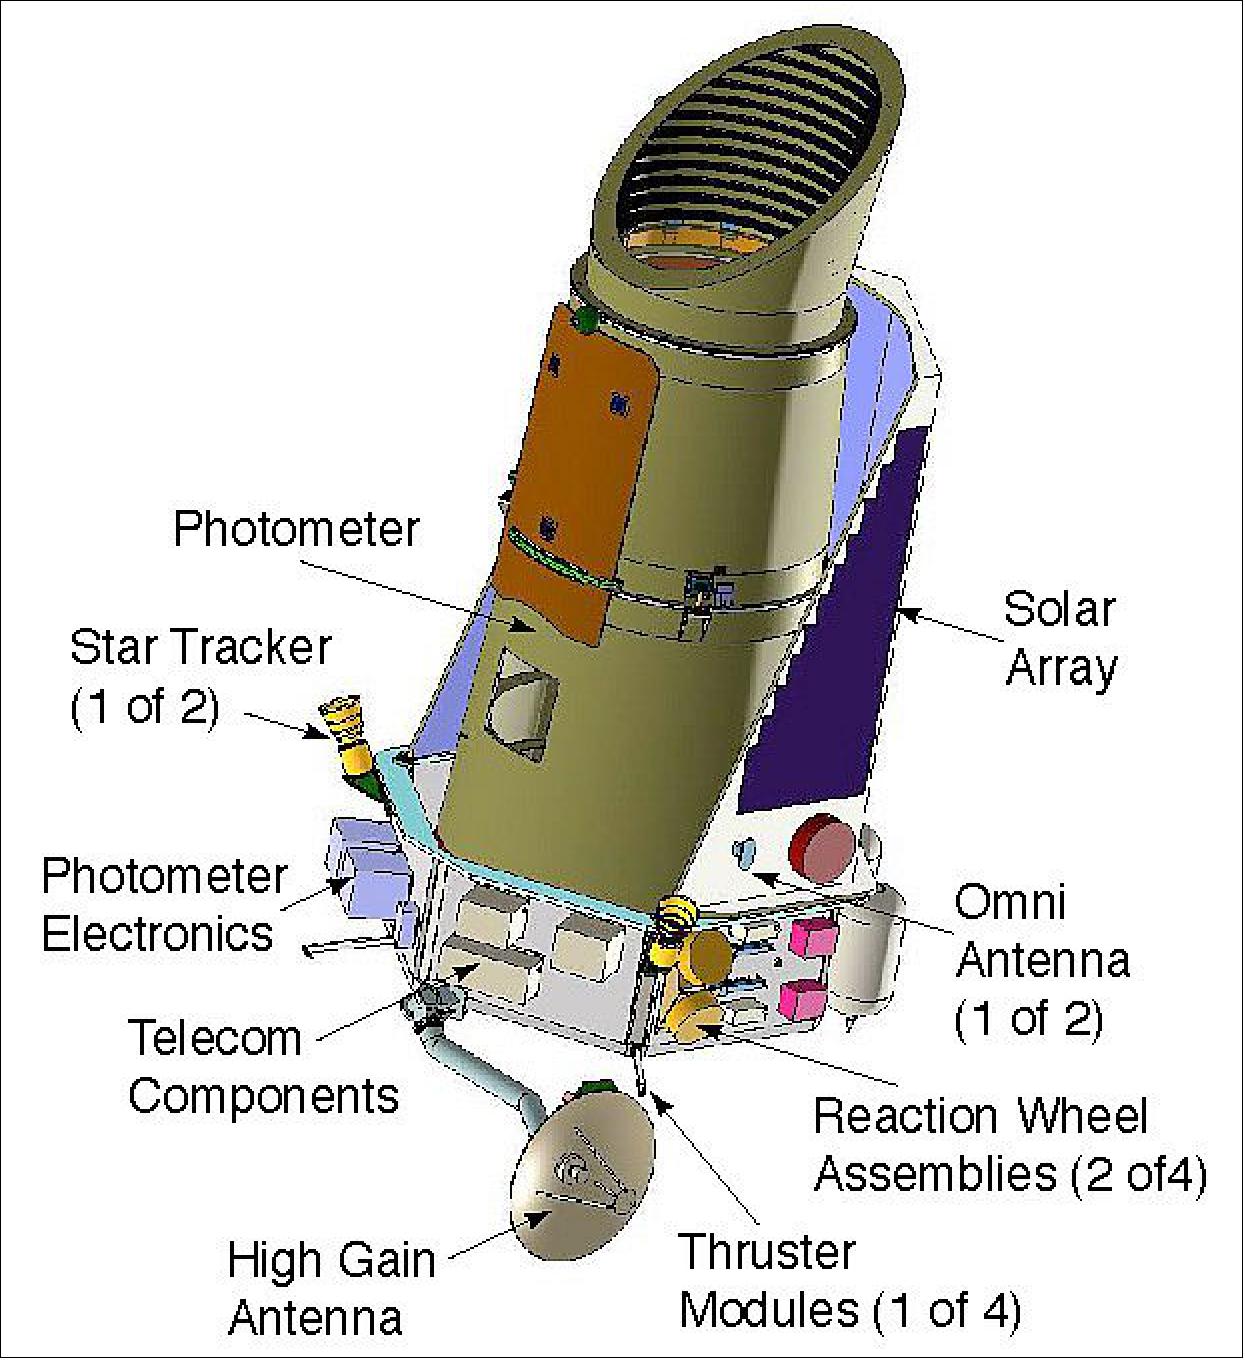 Figure 3: The Kepler spacecraft with the HGA (High Gain Antenna) deployed and the photometer (image credit: NASA, KeplerTeam)